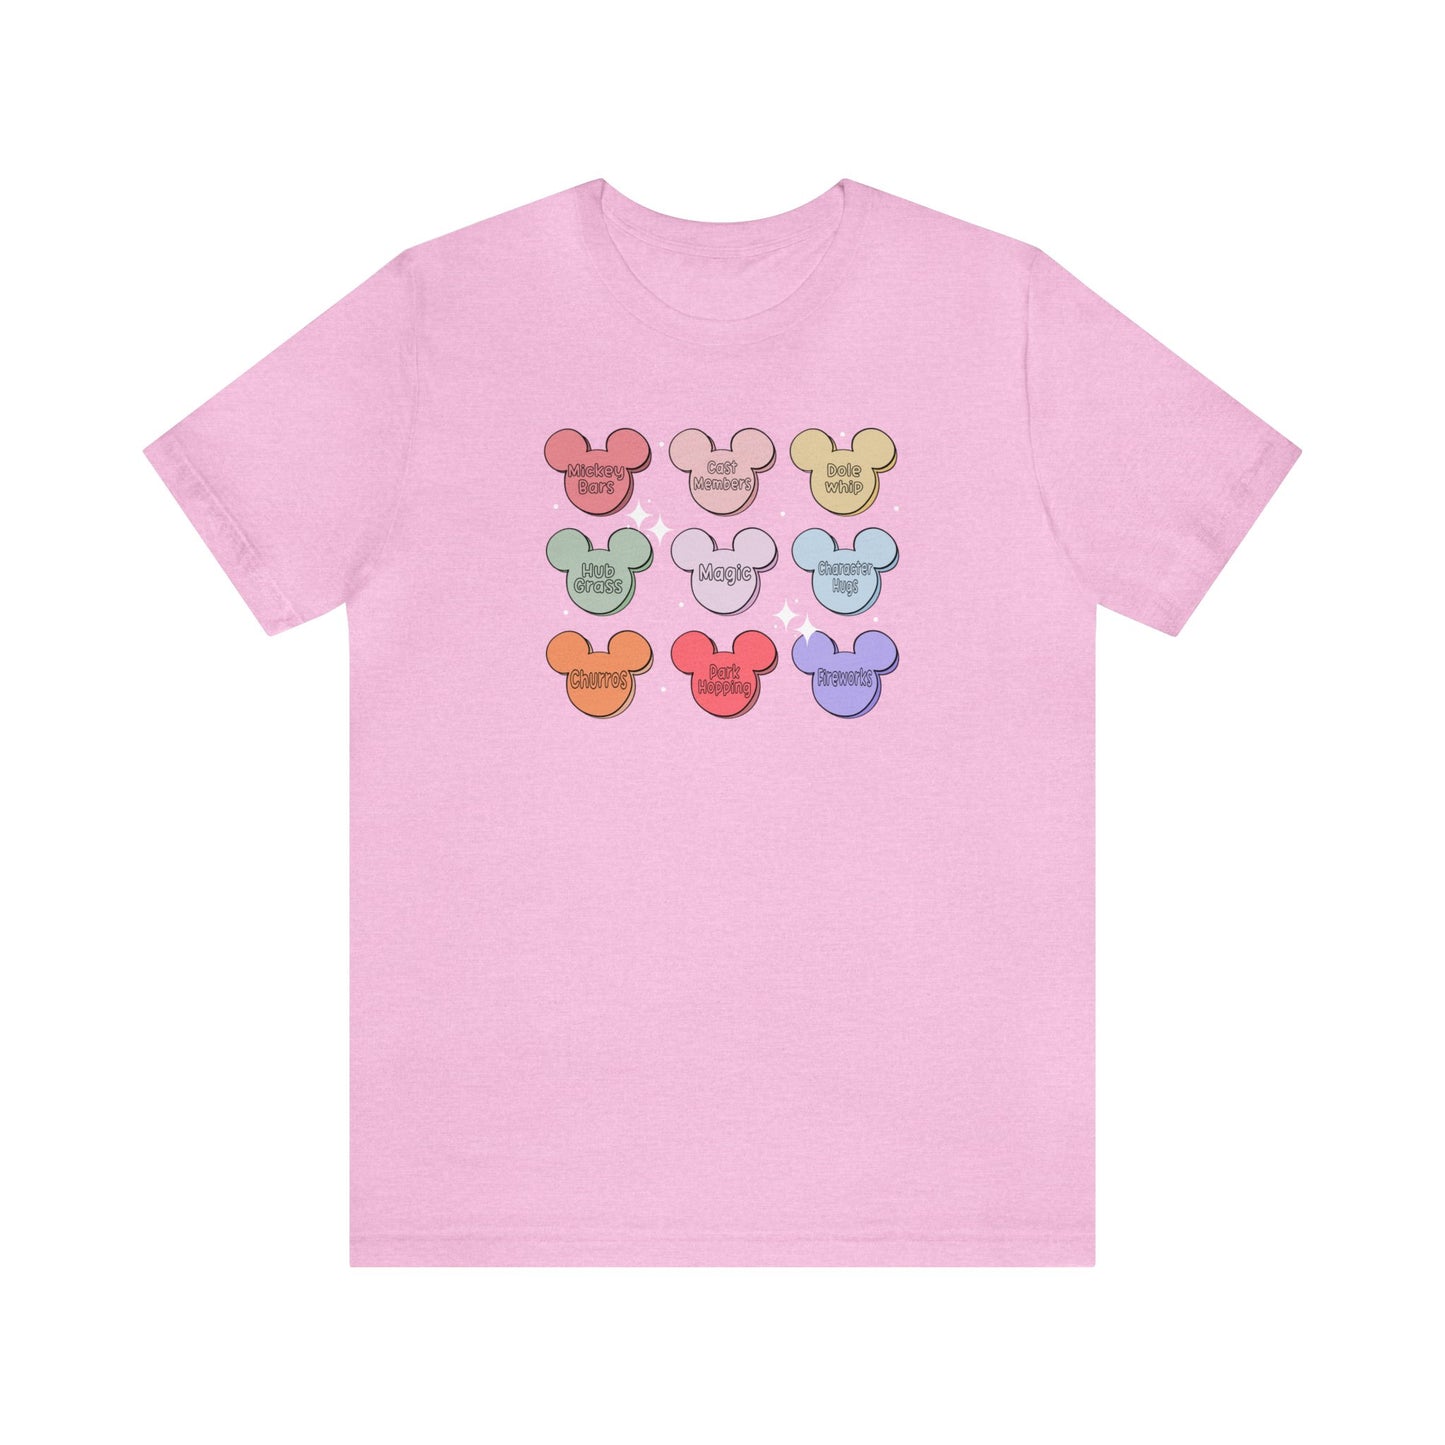 Favorite Candy Hearts Adult Unisex Tee